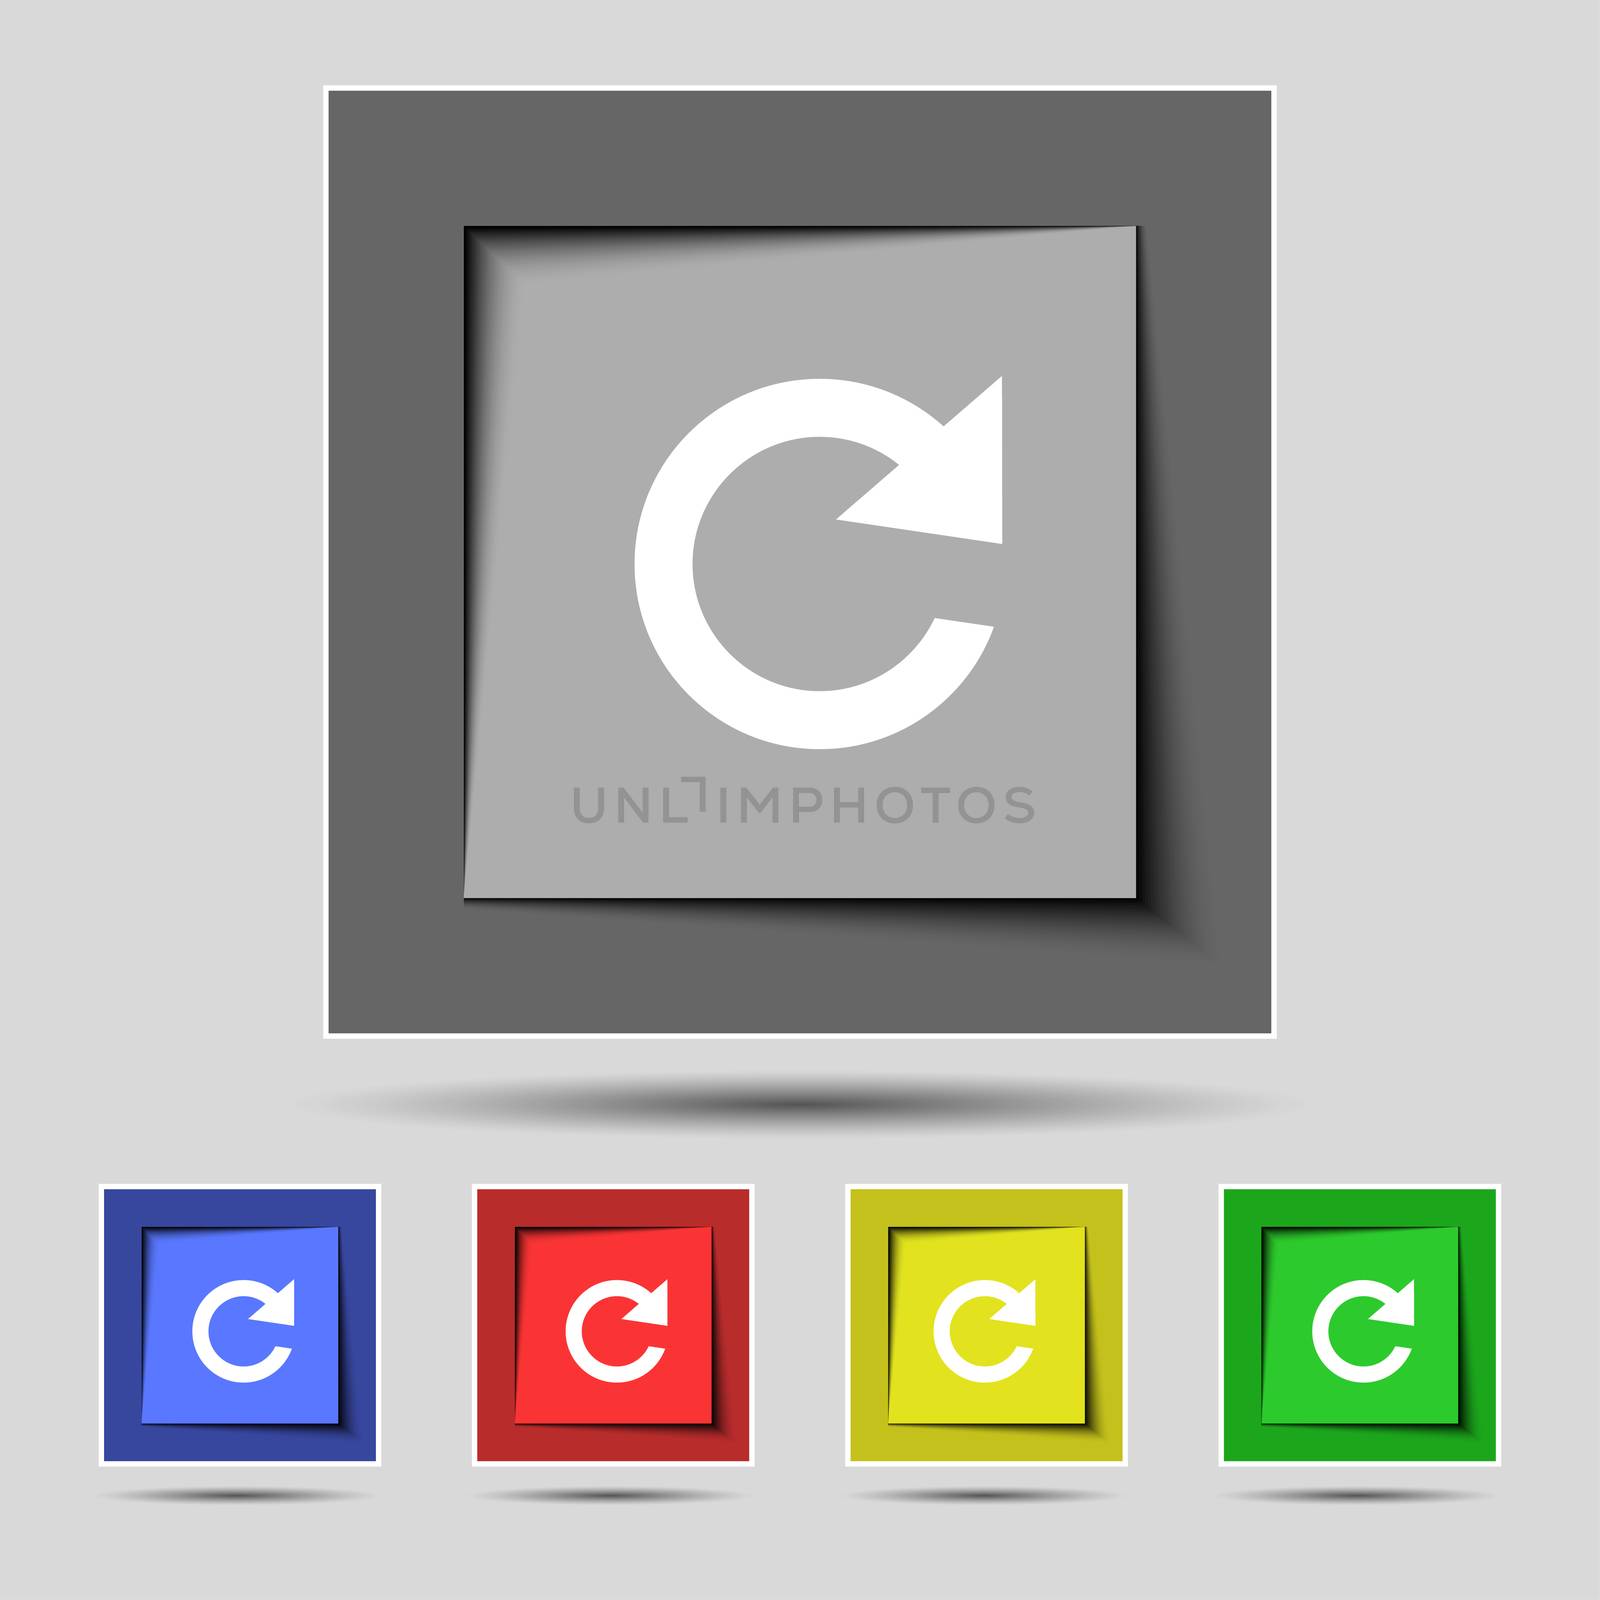 update sign icon. Full rotation arrow symbol. Set colourful buttons. illustration